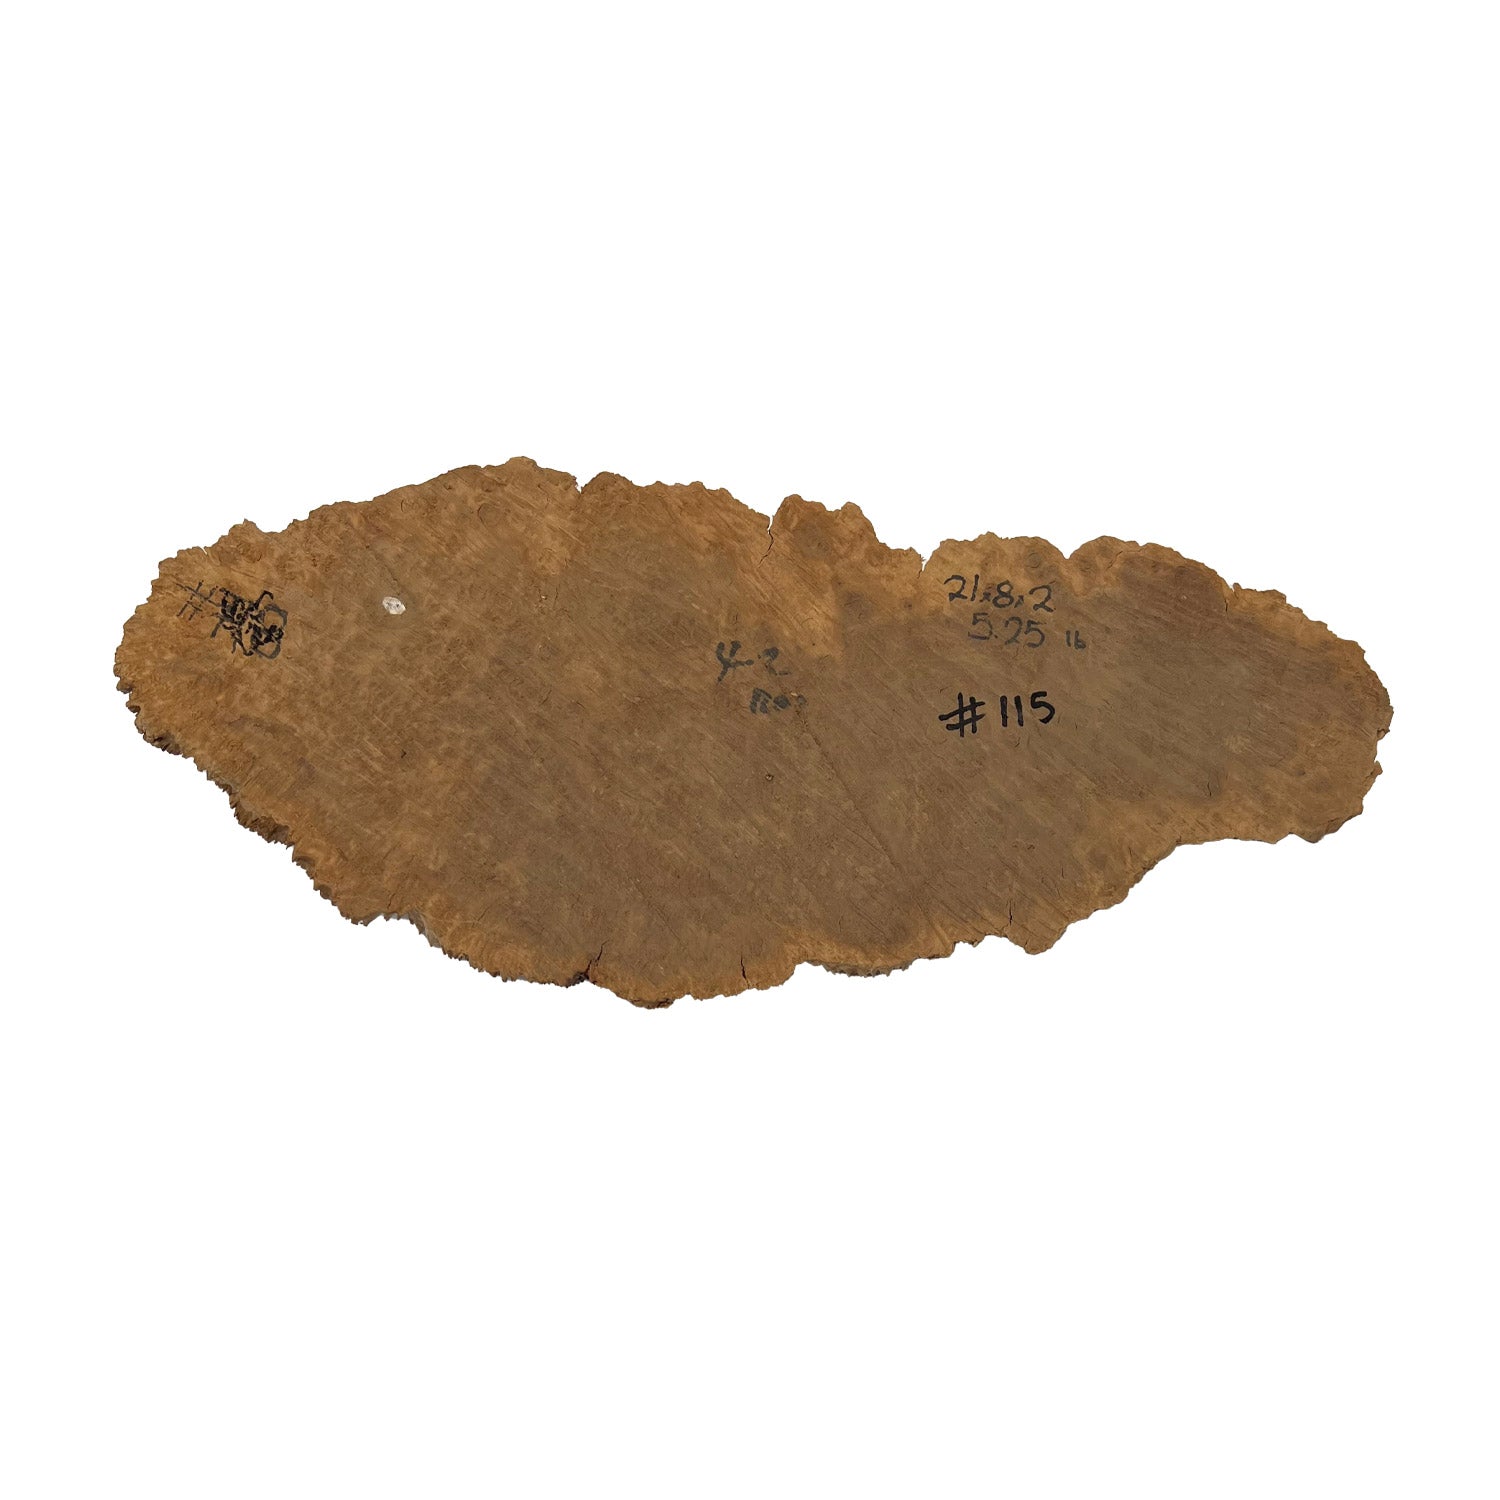 Red Mallee Burl | 21&quot; x 8&quot; x 2&quot; | 5.25 lbs - 